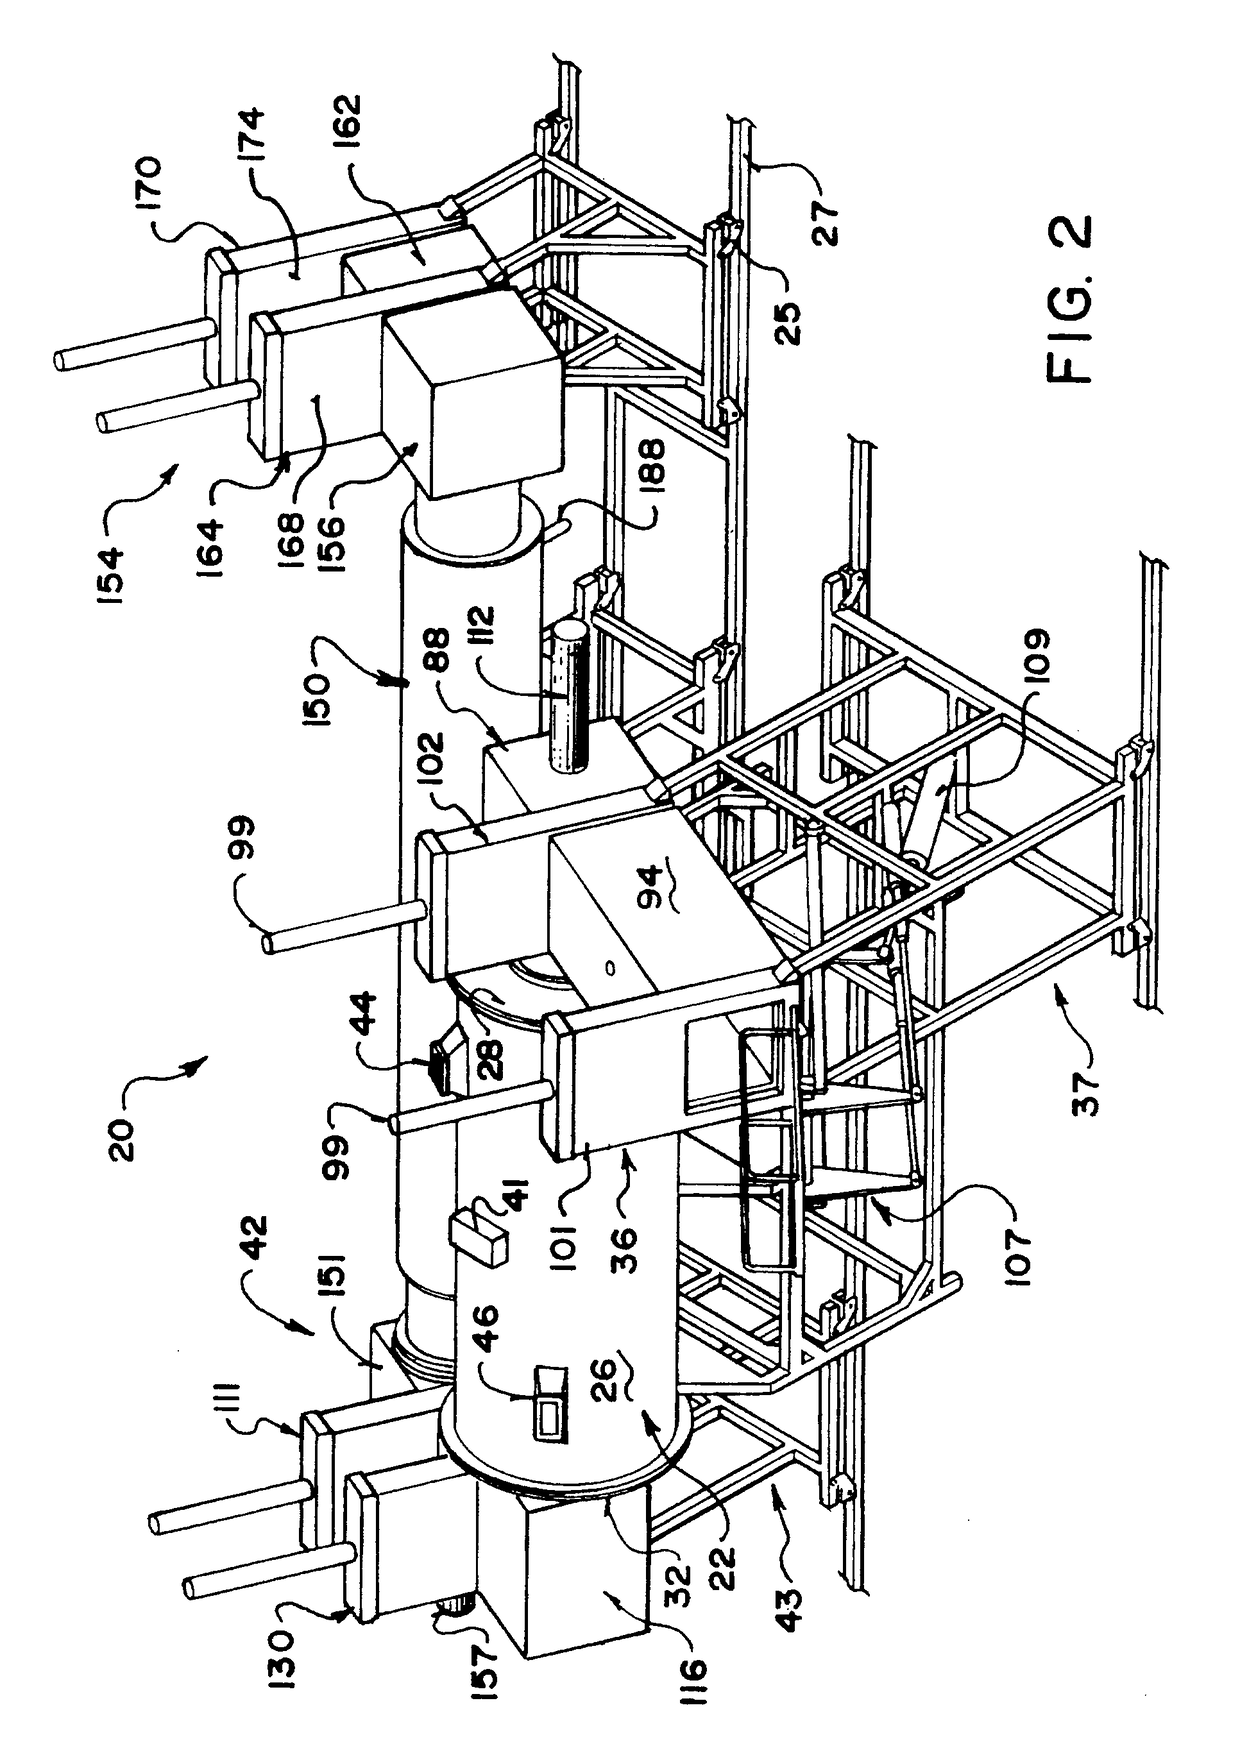 Apparatus and method for microwave vacuum-drying of organic materials